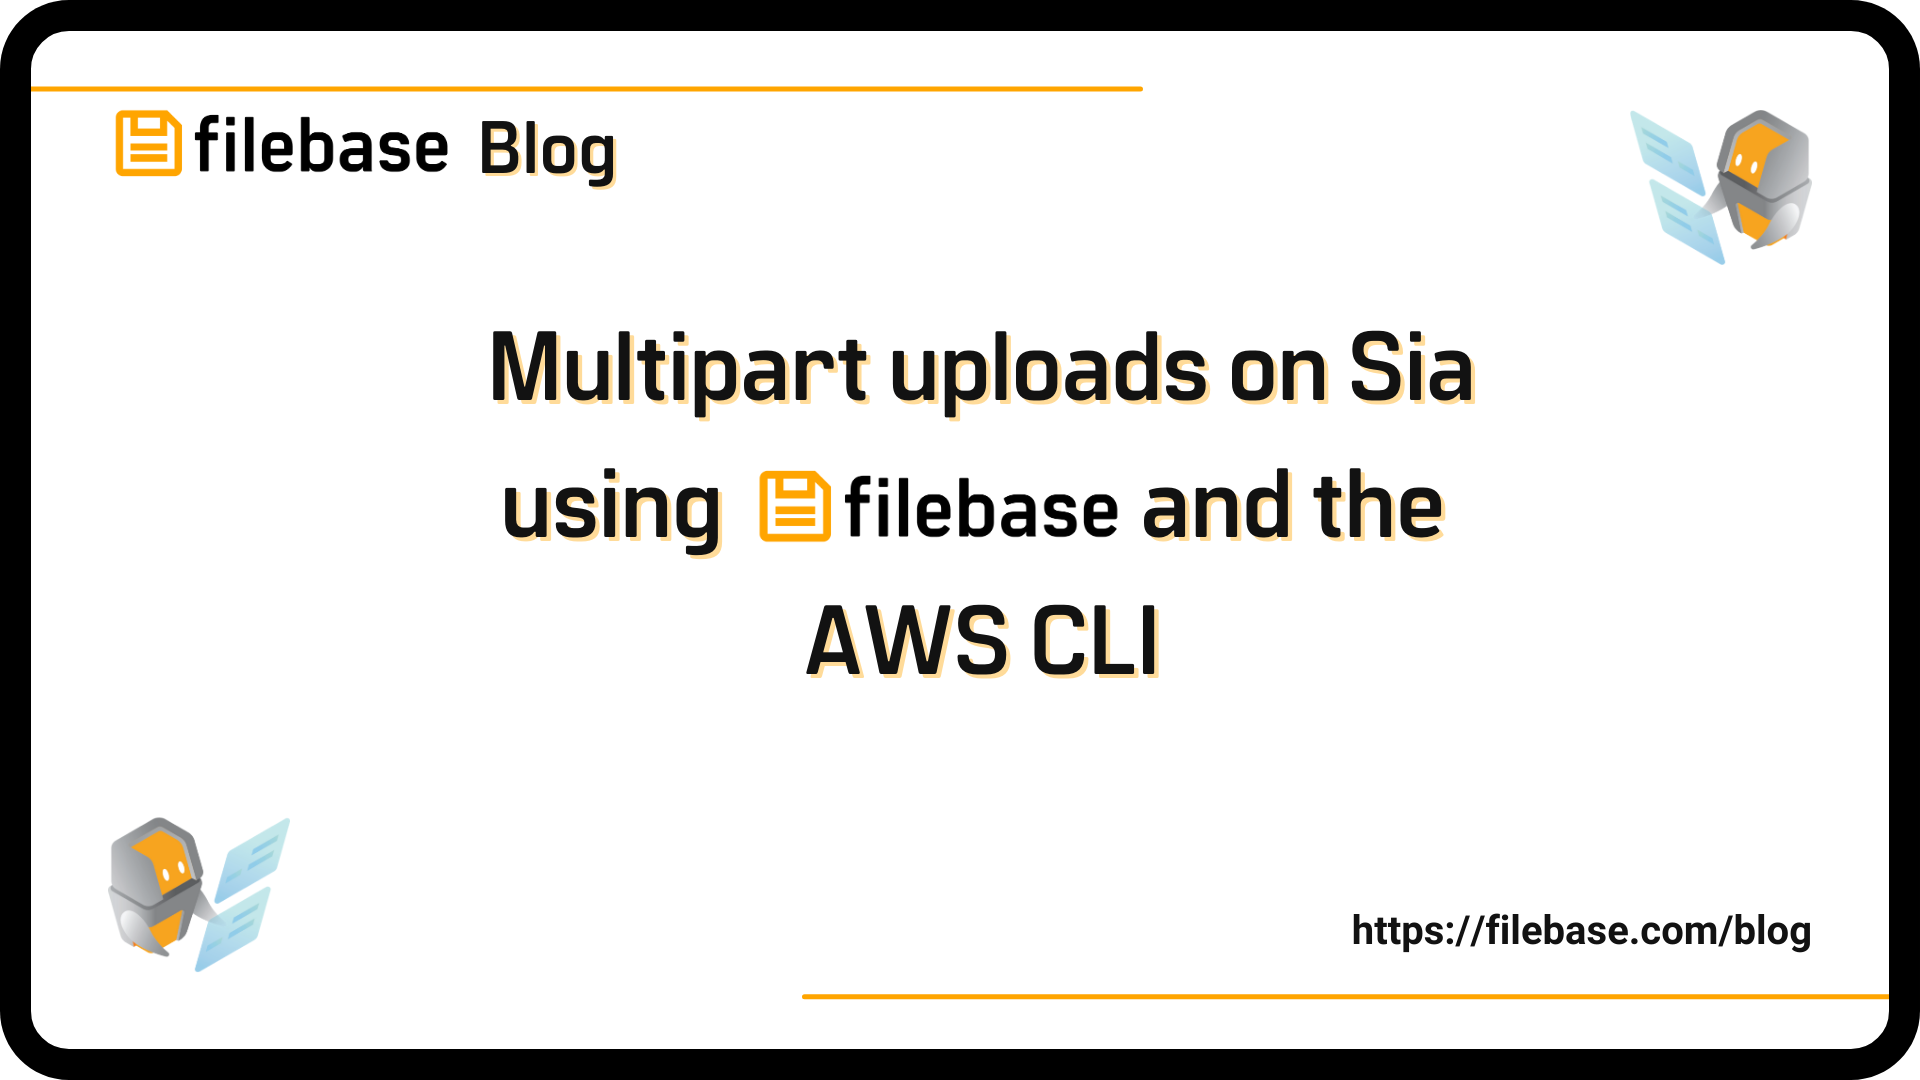 Multipart uploads on Sia using Filebase and the AWS CLI